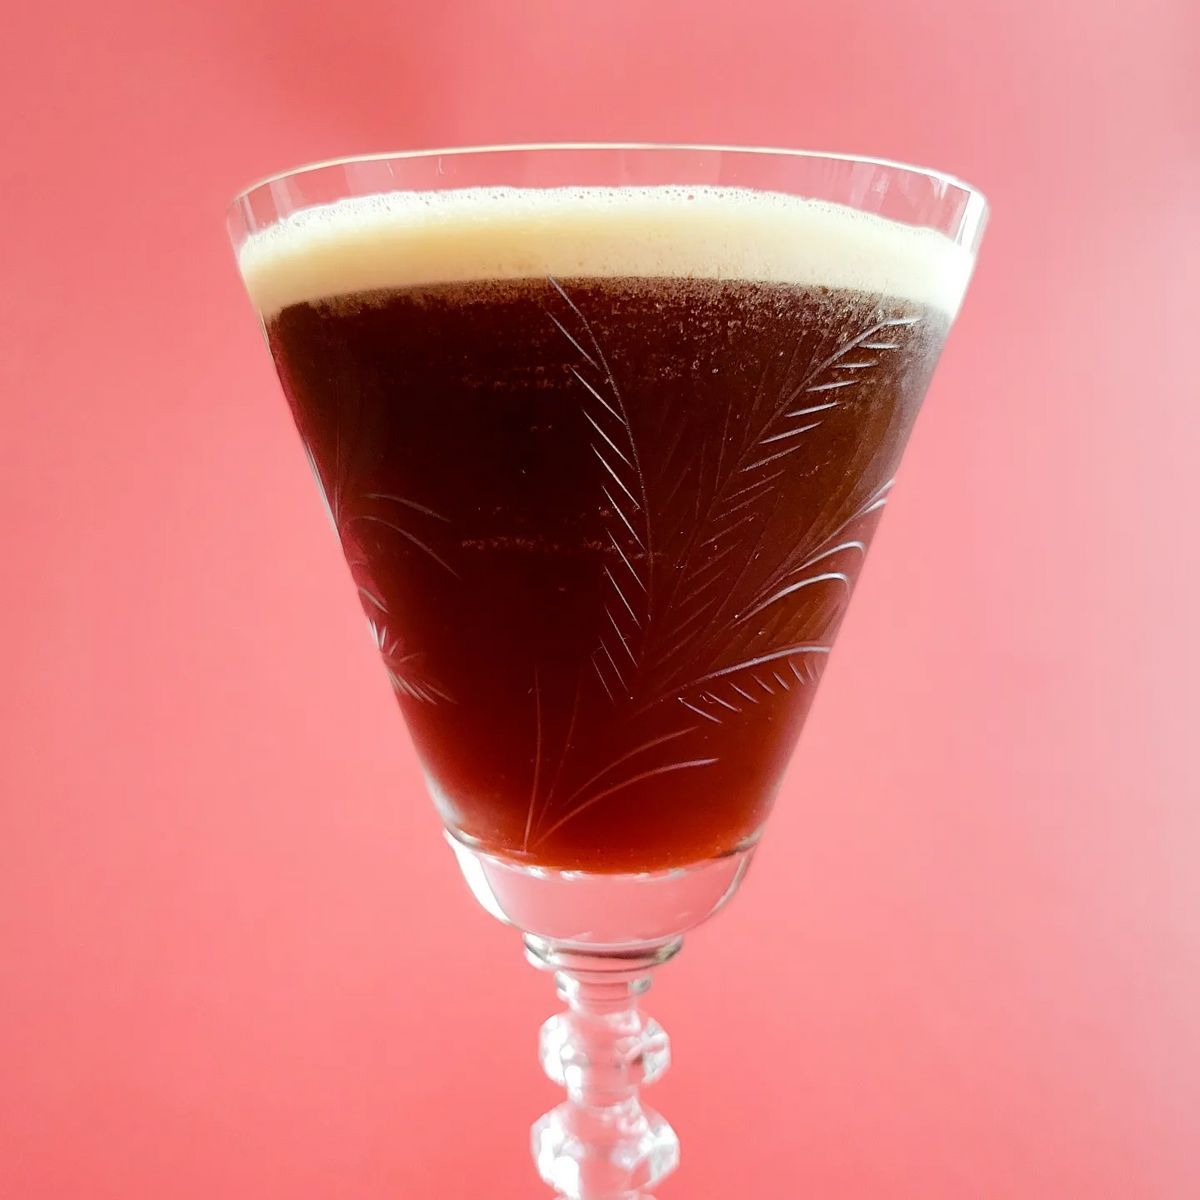 My go to espresso martini evolves over time. My main template used to be the below minus the triple sec, and I'd rotate between different coffee liqueurs and base spirits. Lately I've been adding either a bit of syrup or a half ounce of a liqueur to change it up  and this is one of my favorite iterations so far, while still not being too sweet. . El Dorado 5 year is one of my favorite rums, paired with one of my favorite coffee liqueurs, and the triple sec just makes it decadent without being overly sweet. 
